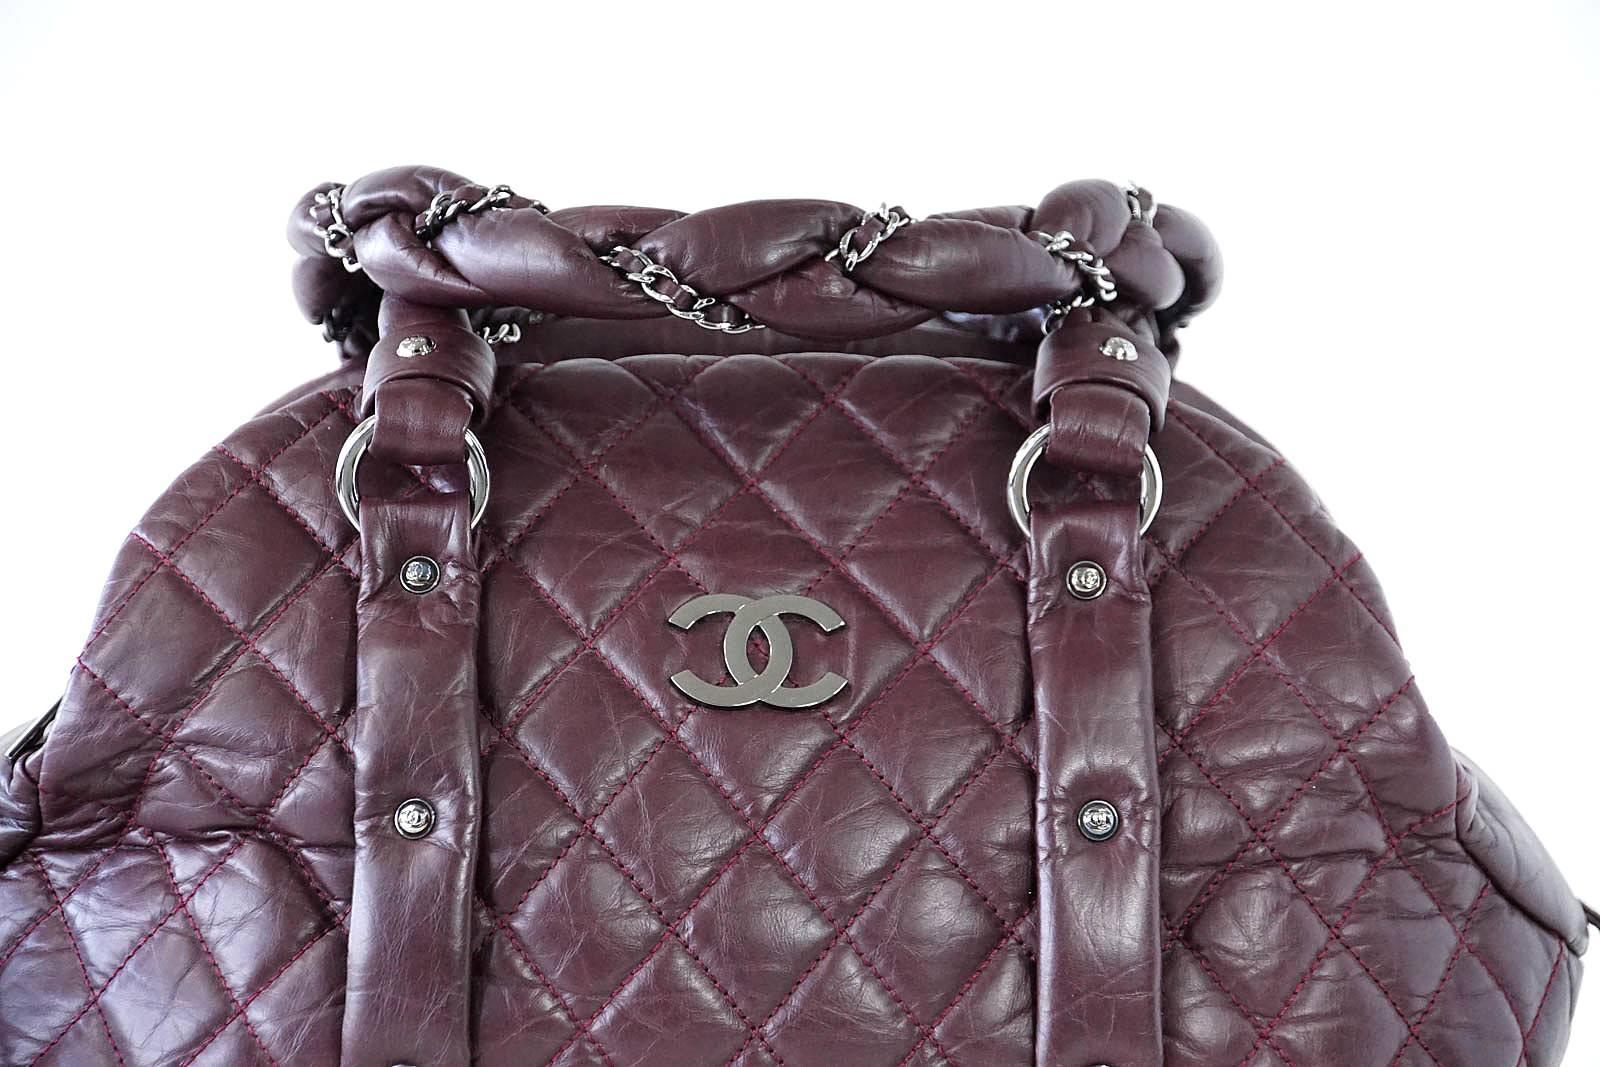 Guaranteed authentic Chanel fabulous Ladybraid Puffer Bowler in bordeaux quilted distressed leather.
Handles are braided leather laced with CHANEL signature chain.
Silver CC Logo front and CC grommets along front and rear.
Bag is divided into 3